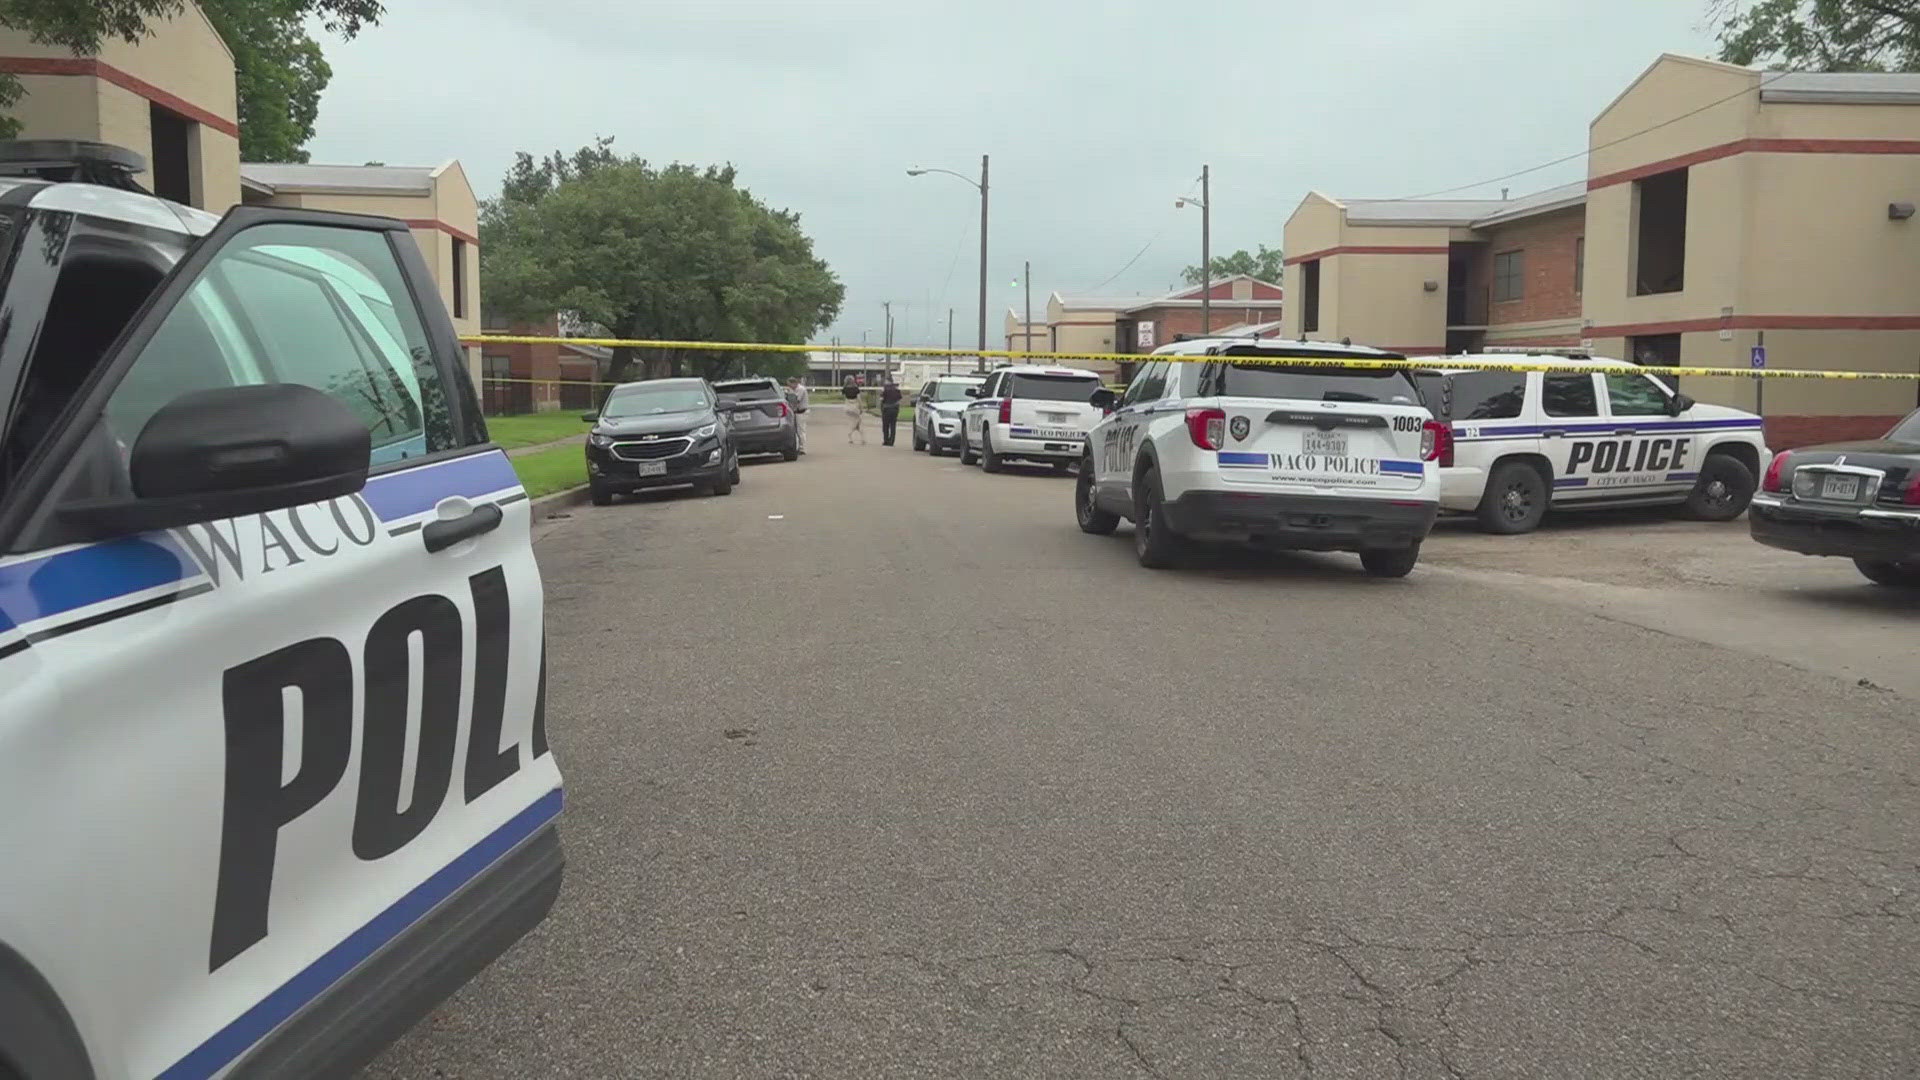 The shooting happened outside an apartment complex in the 900 block of S. 12th Street around 12:30 p.m.